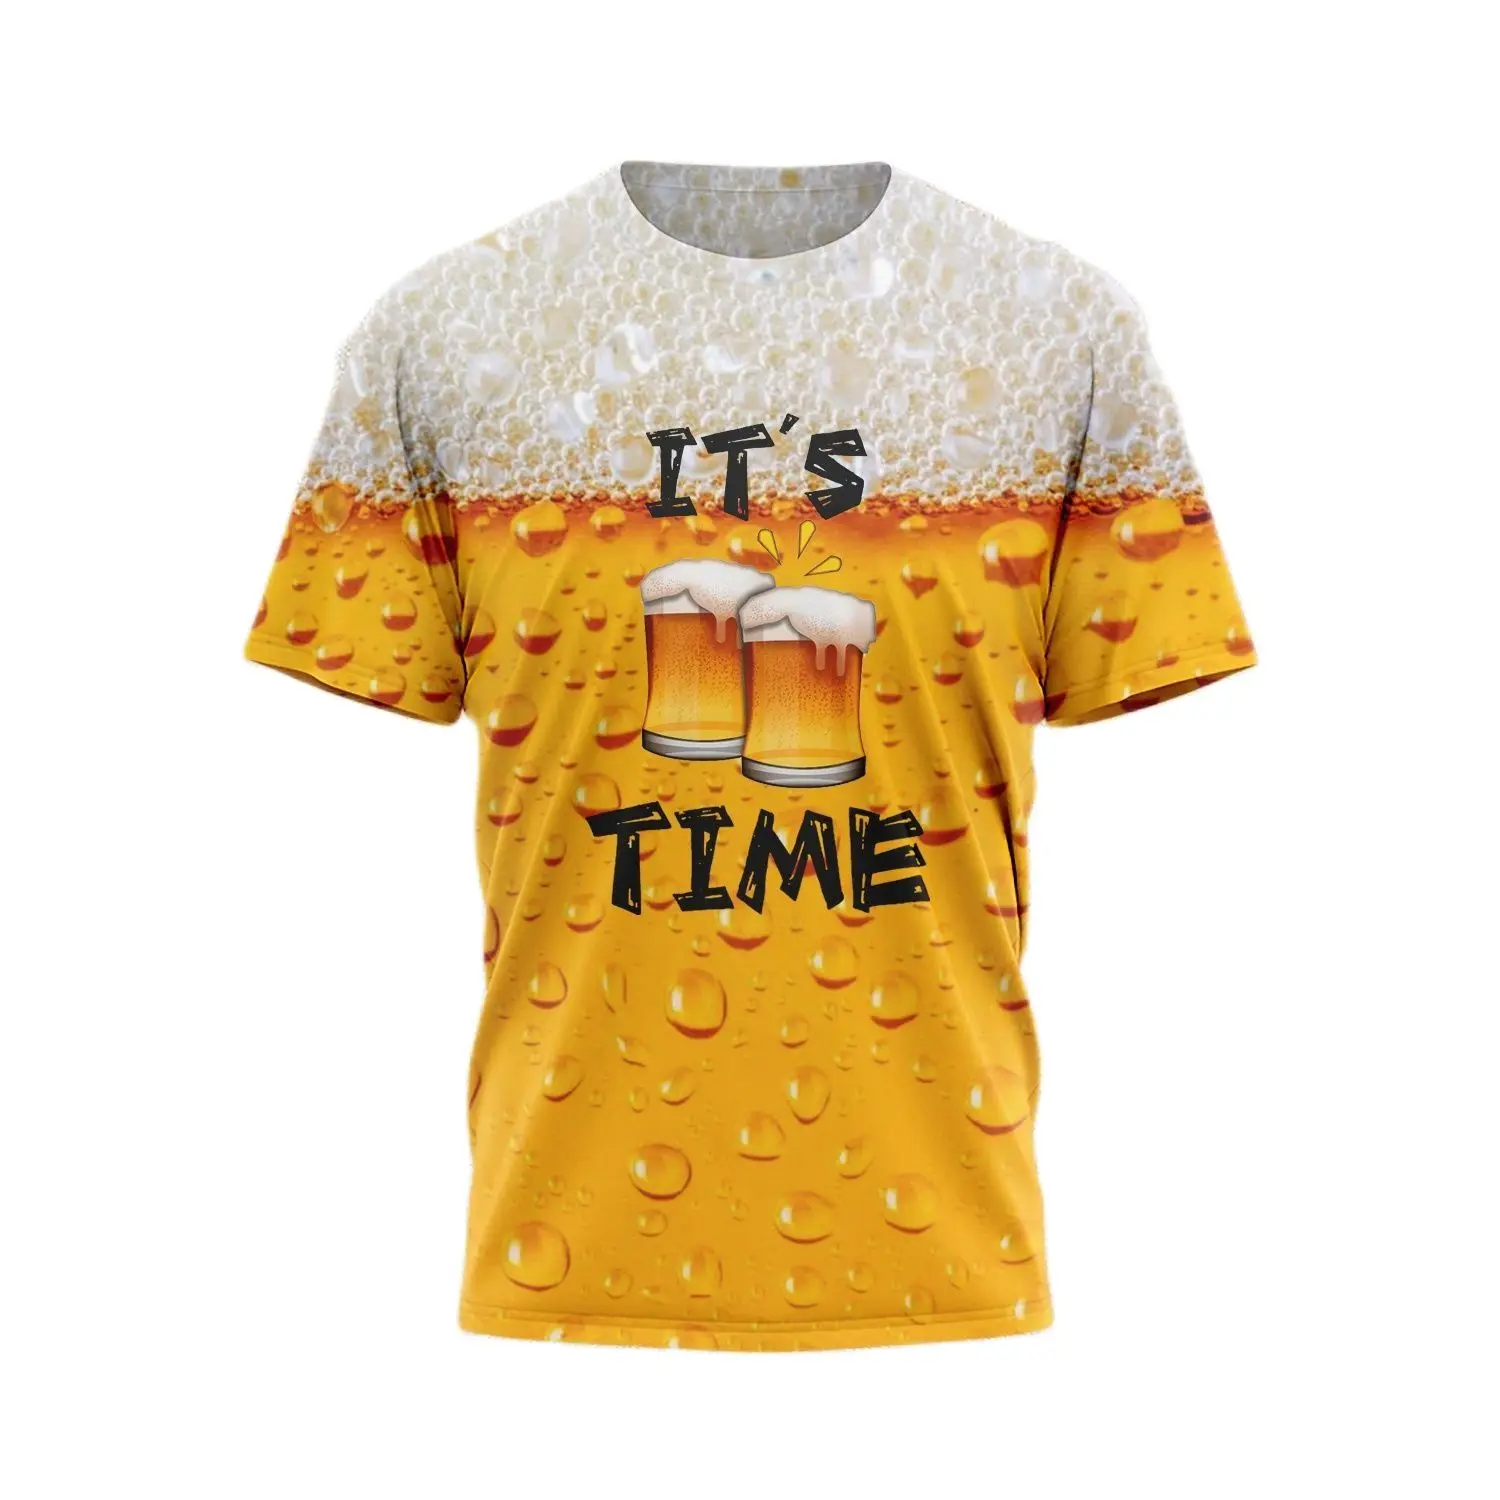 T Shirt For Men 3D Print Beer Graphic t shirts Women Men Funny Novelty T-shirt Short Sleeve Tops Unisex Outfit Clothing